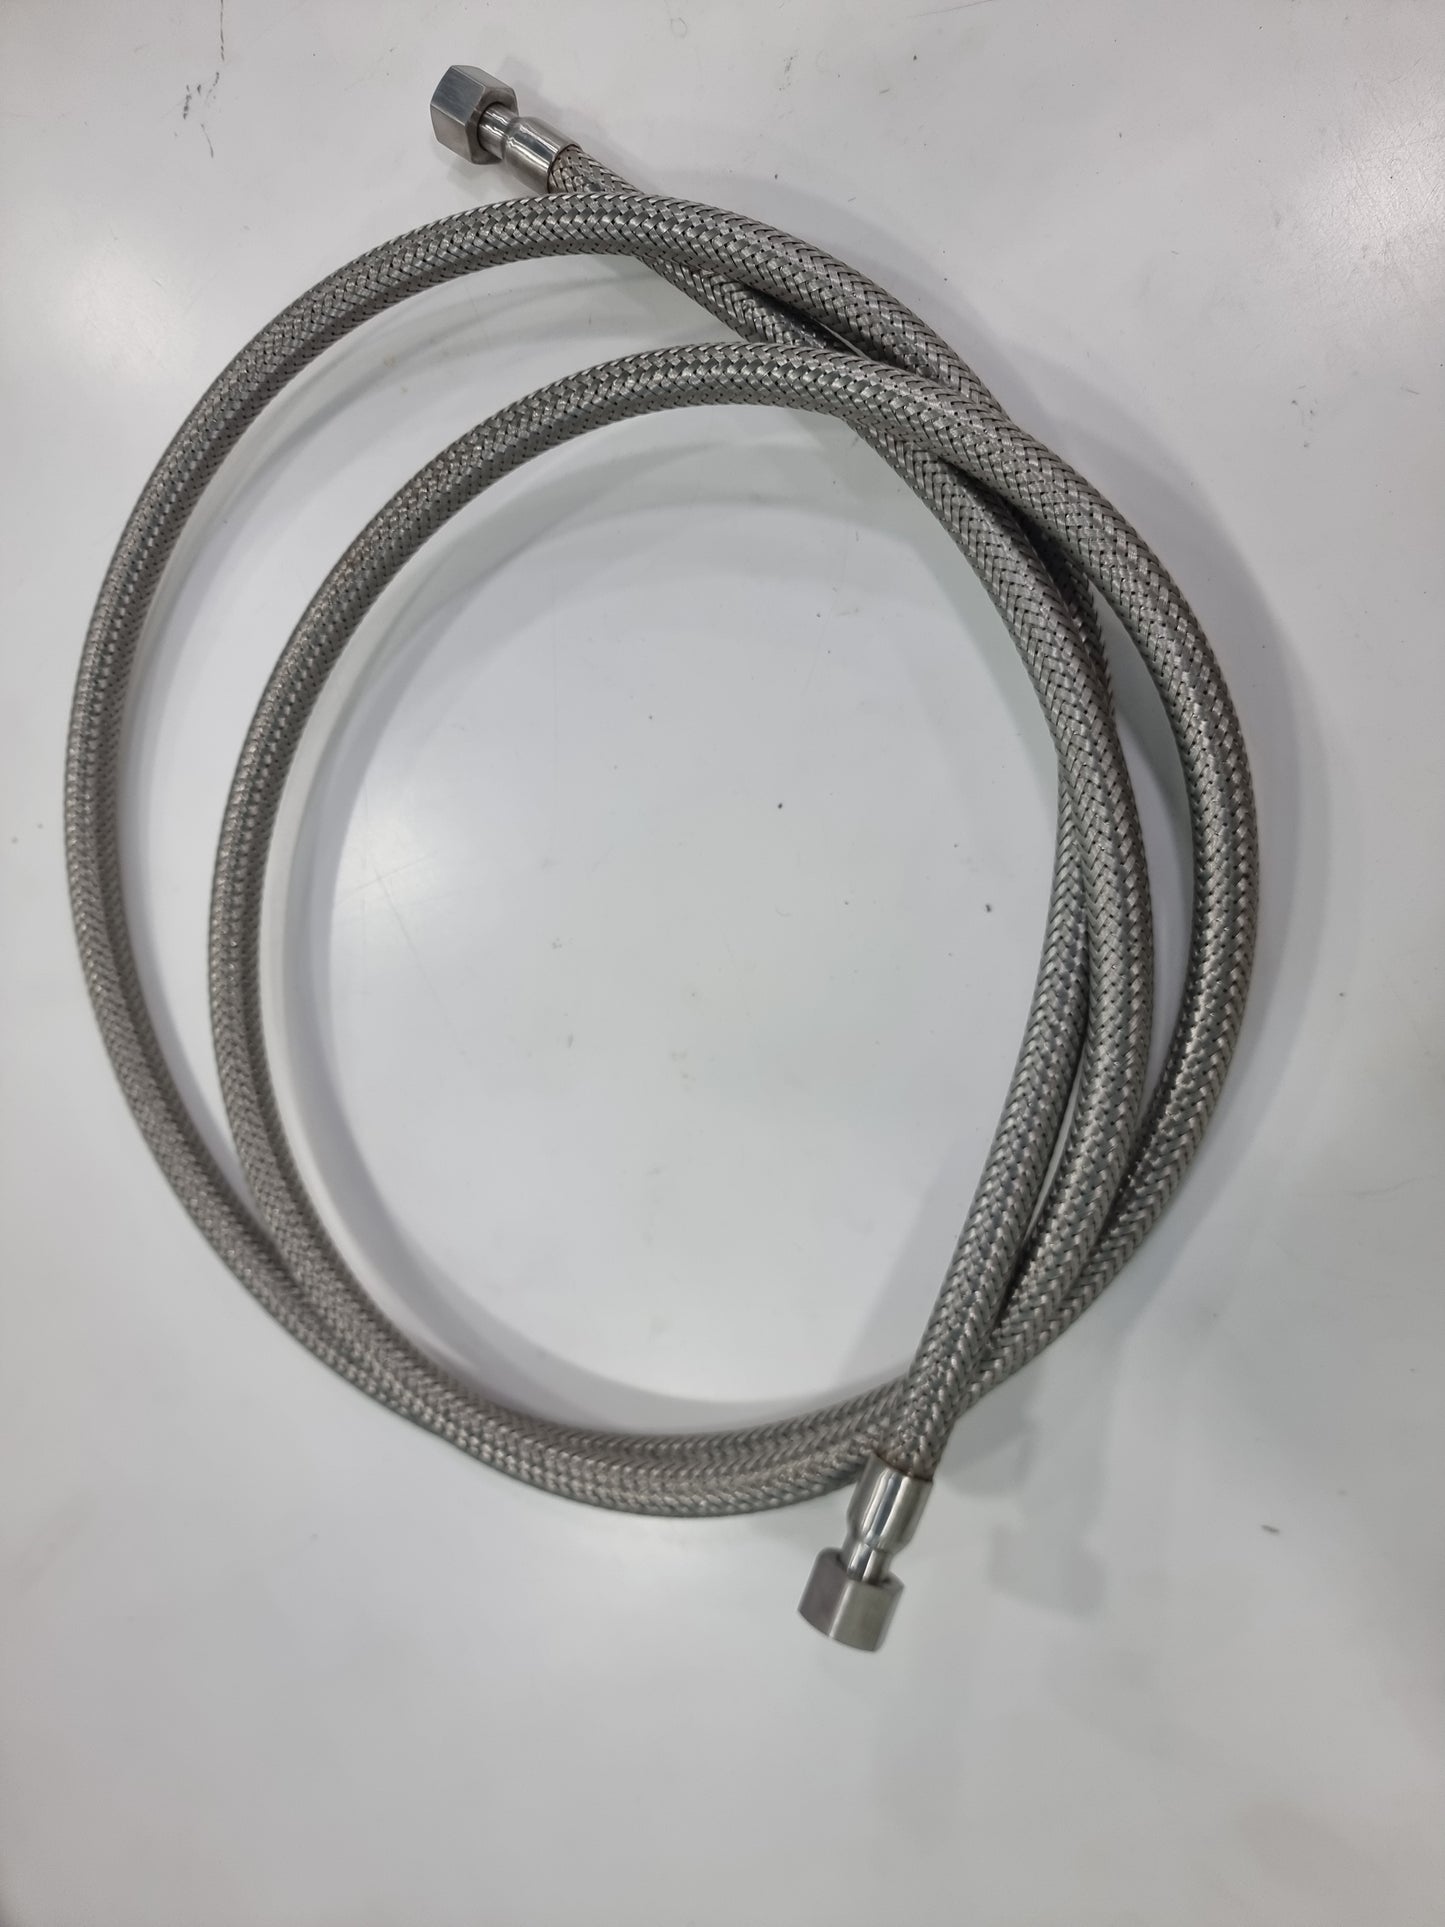 SS 304 FLEXIBLE HOSE ASSEMBLY 1/2" X 1.5 MTR. FEMALE BOTH END